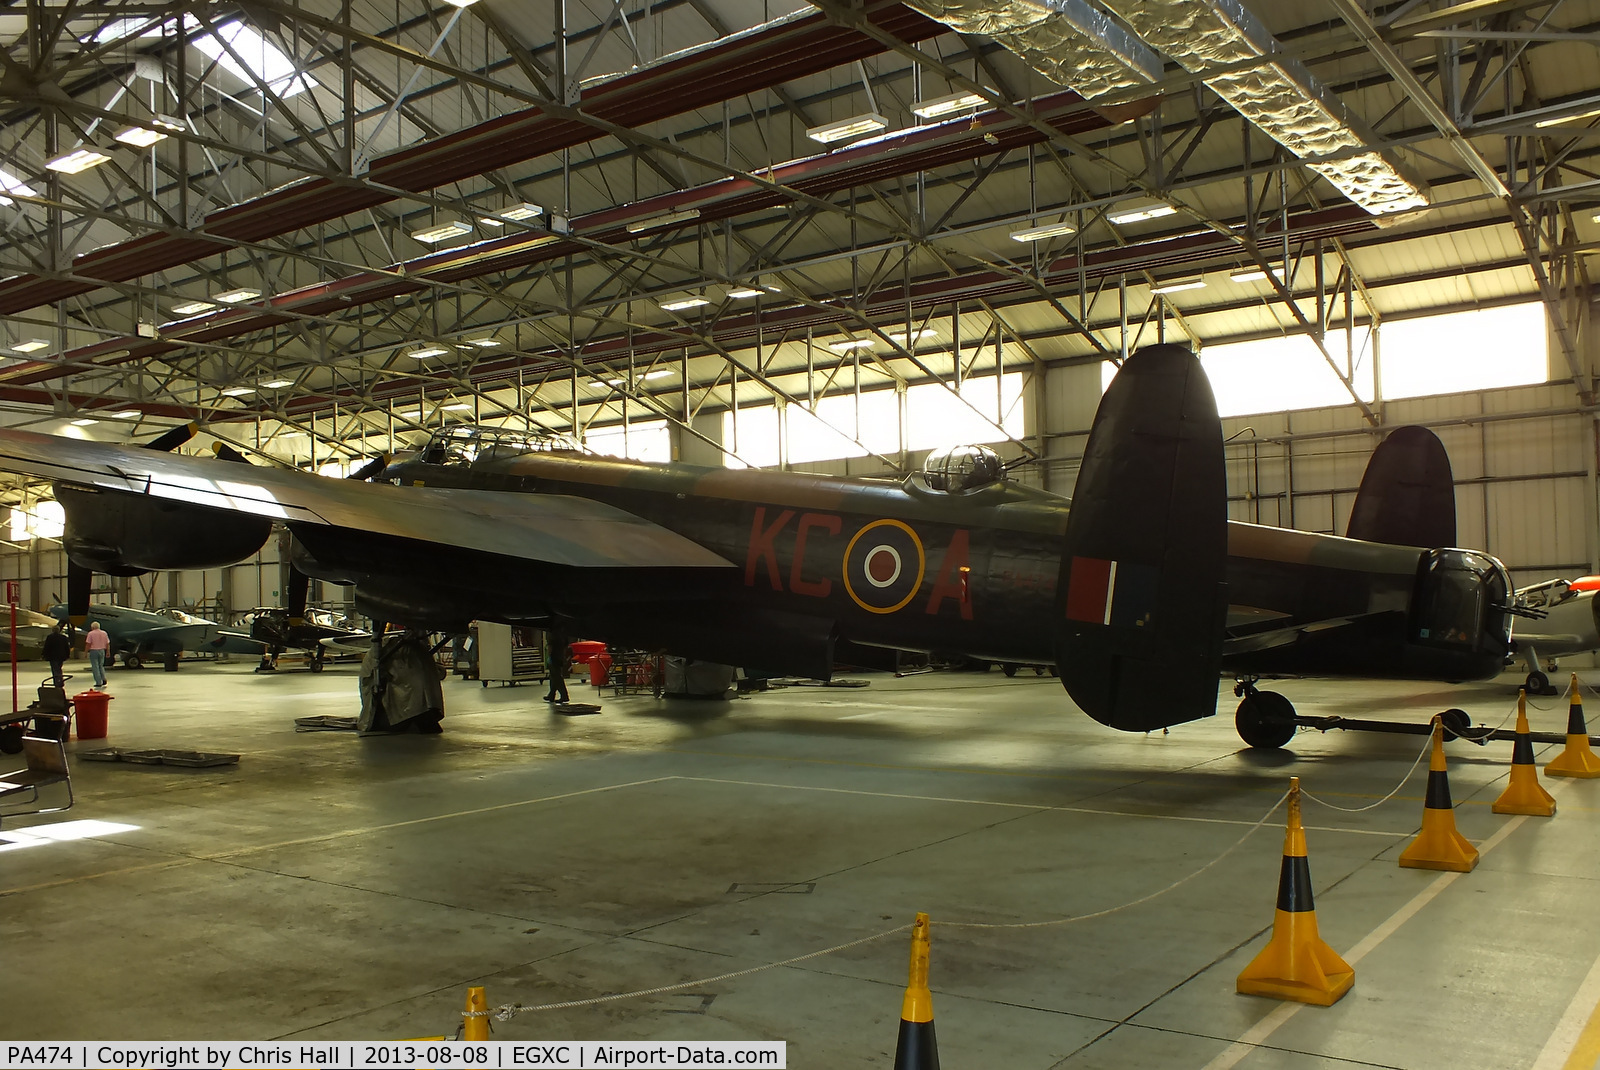 PA474, 1945 Avro 683 Lancaster B1 C/N VACH0052/D2973, PA474 rolled off the production line at the Vickers Armstrong Broughton factory at Hawarden Airfield, Chester on 31 May 1945, just after the war in Europe came to an end.